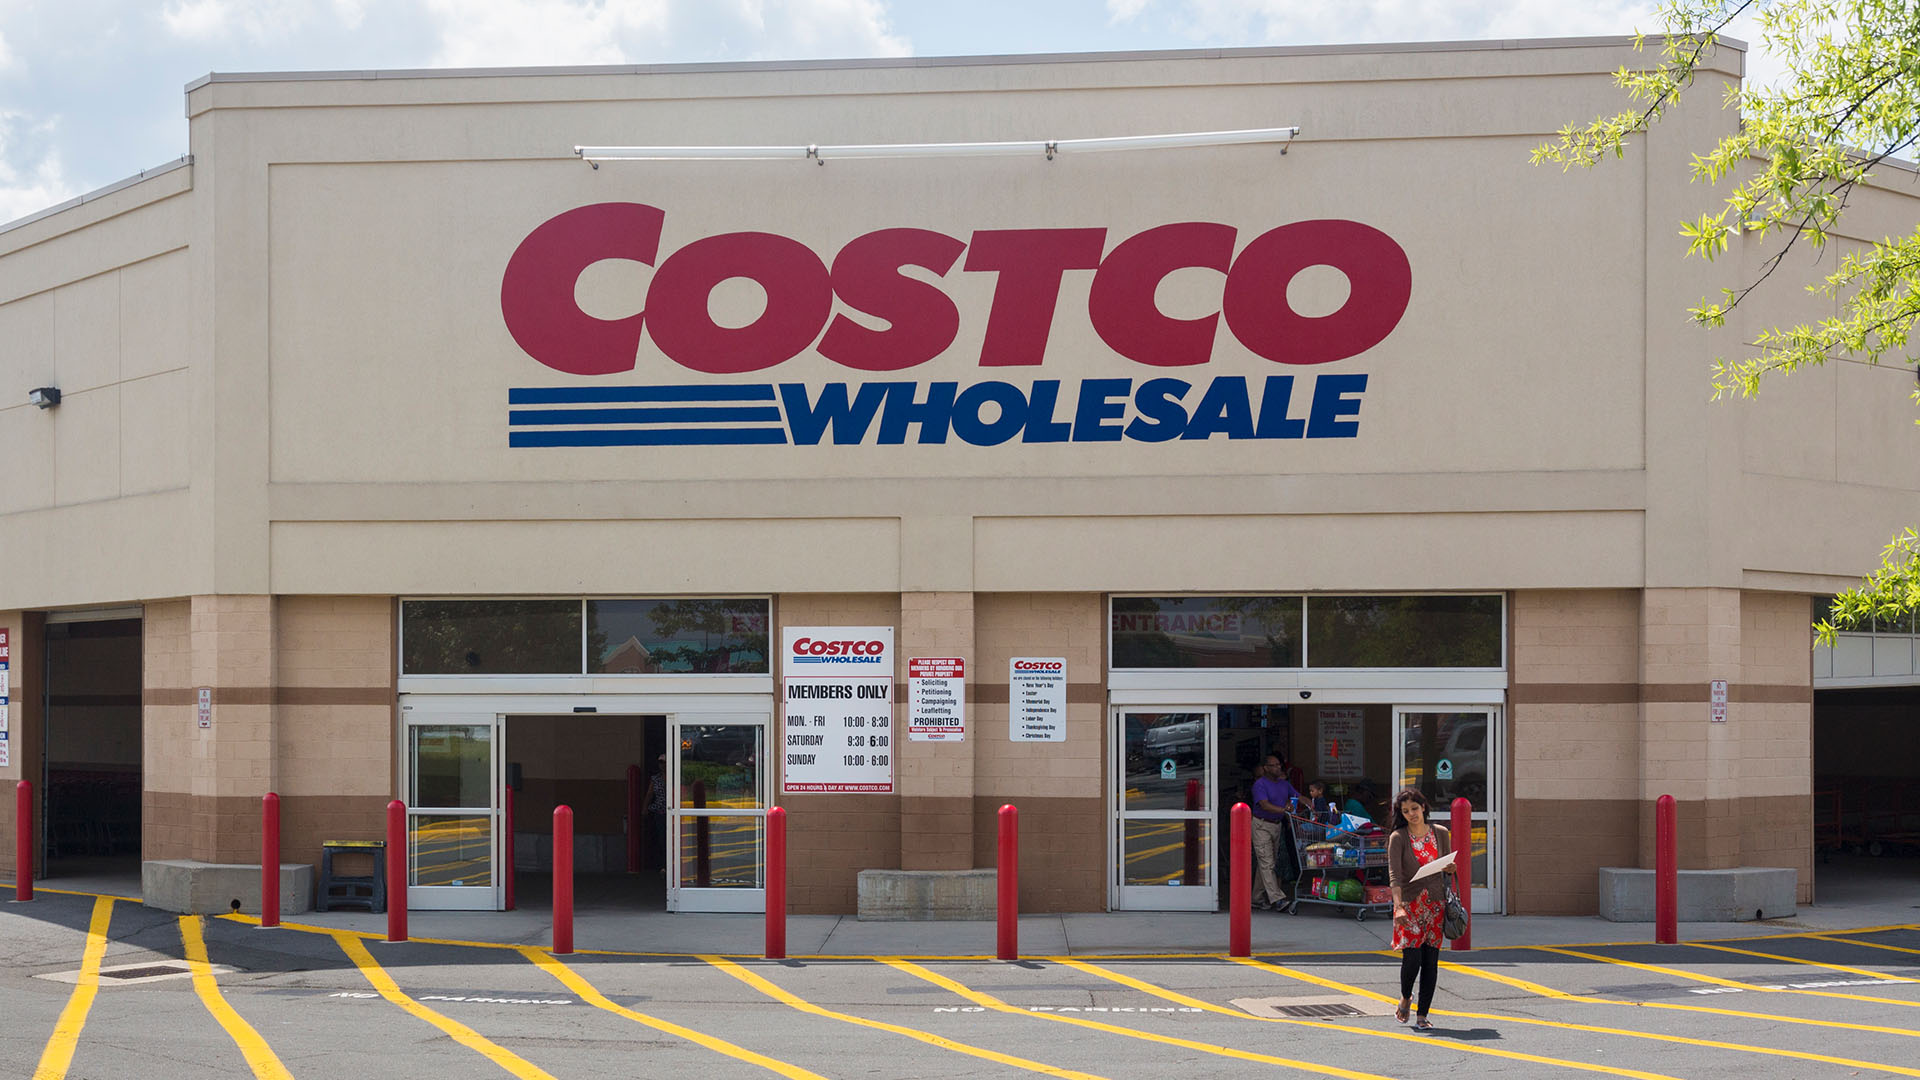 Costco food court may roll out major menu change after years-long backlash from customers threatening to boycott store [Video]